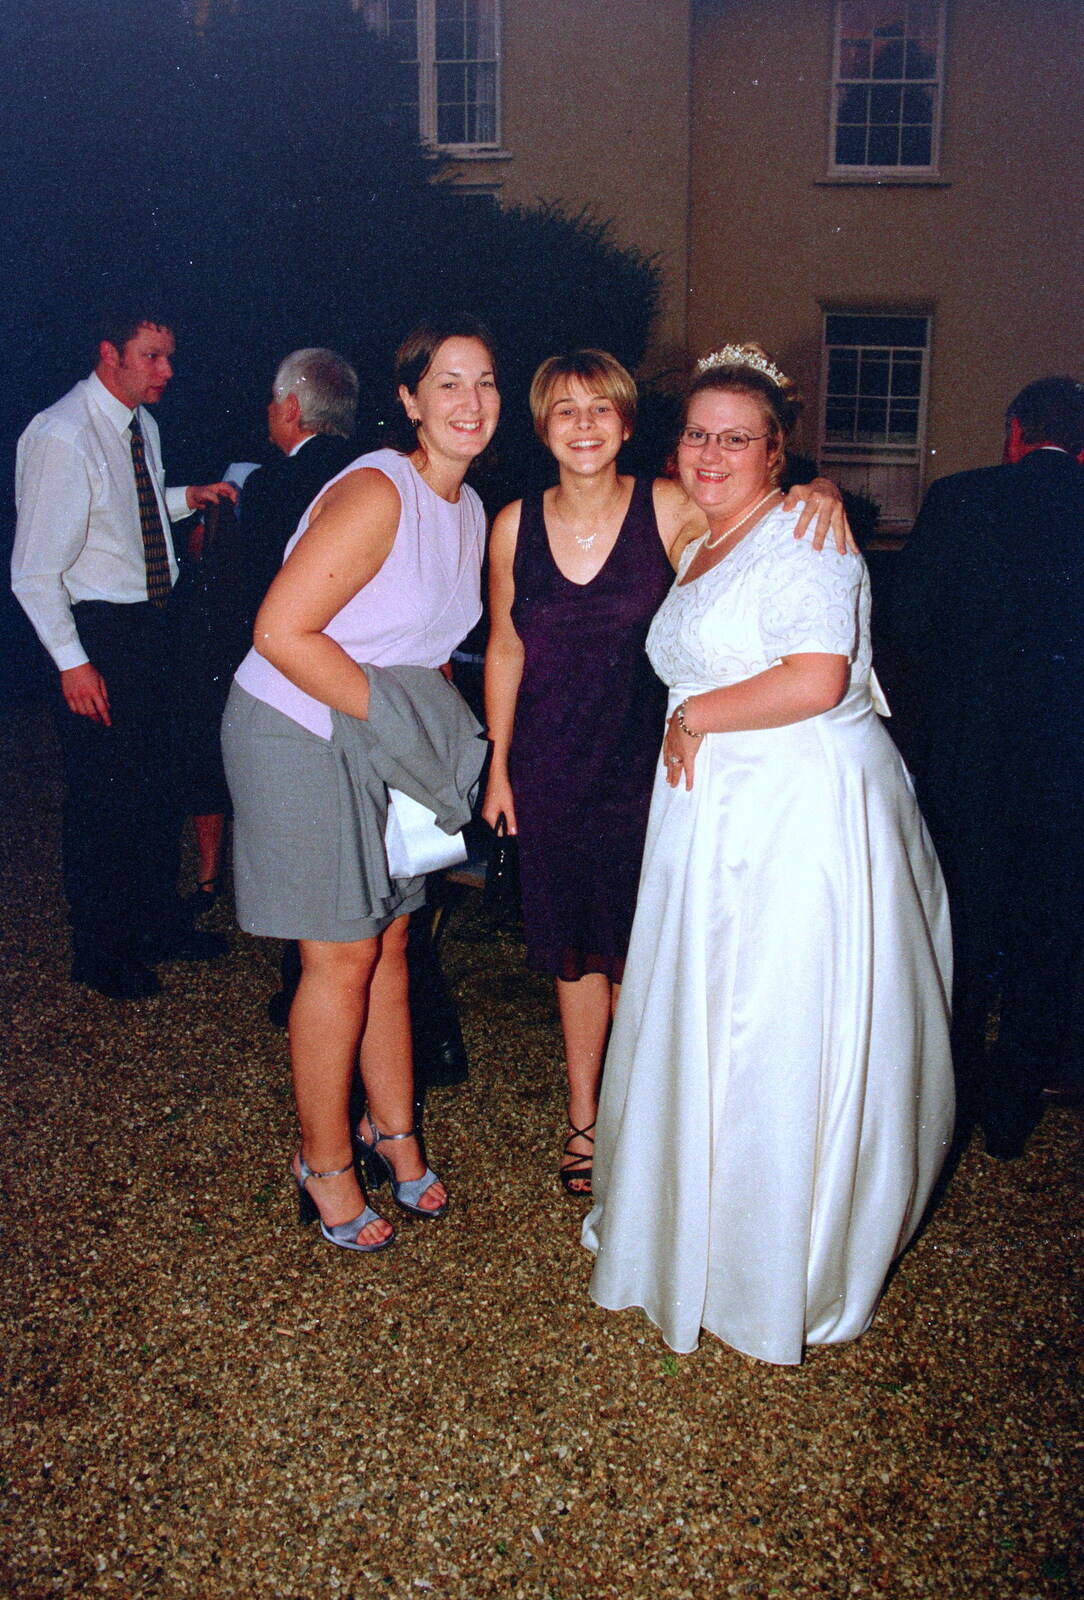 Helen and friends from Helen and Neil's Wedding, The Oaksmere, Brome, Suffolk - 4th August 2000